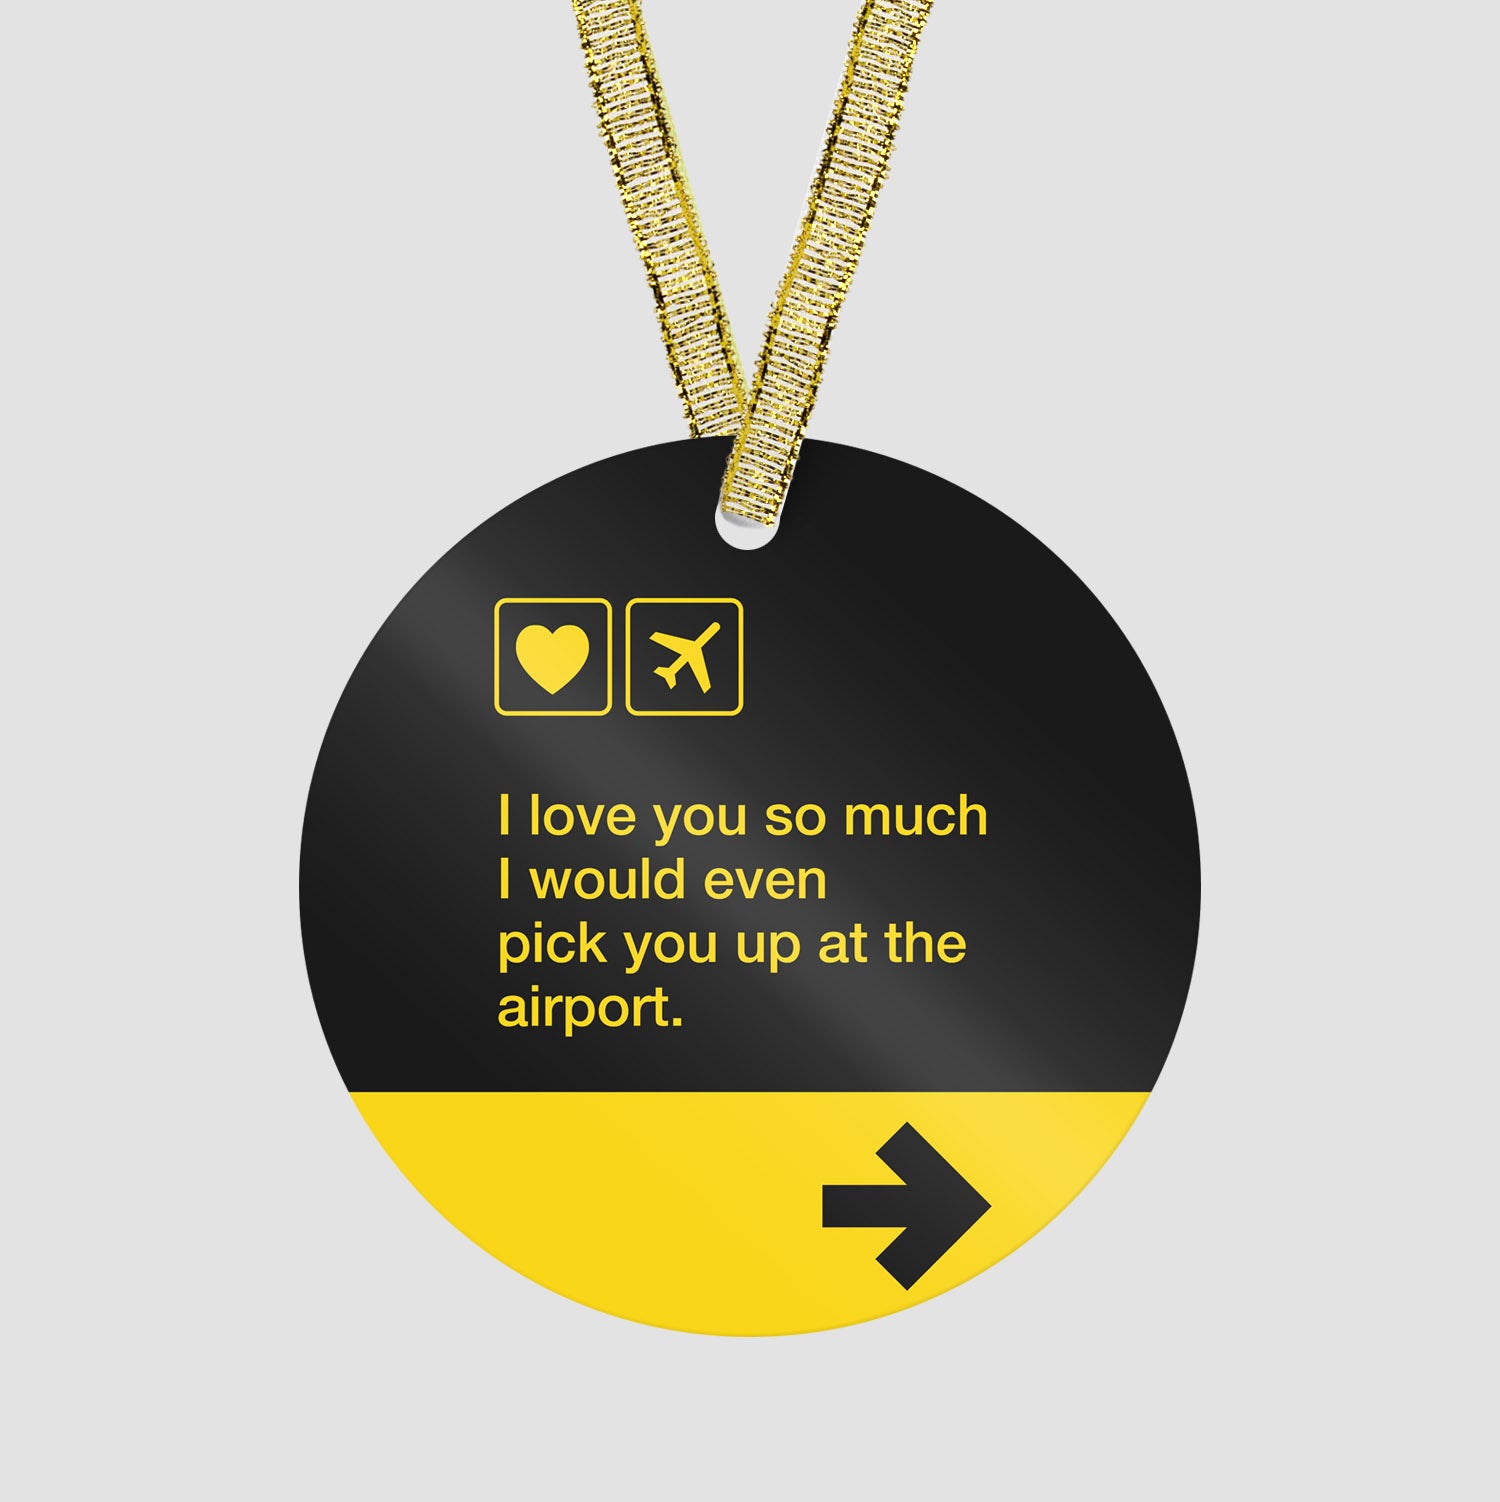 I love you... pick you up at the airport - Ornament - Airportag